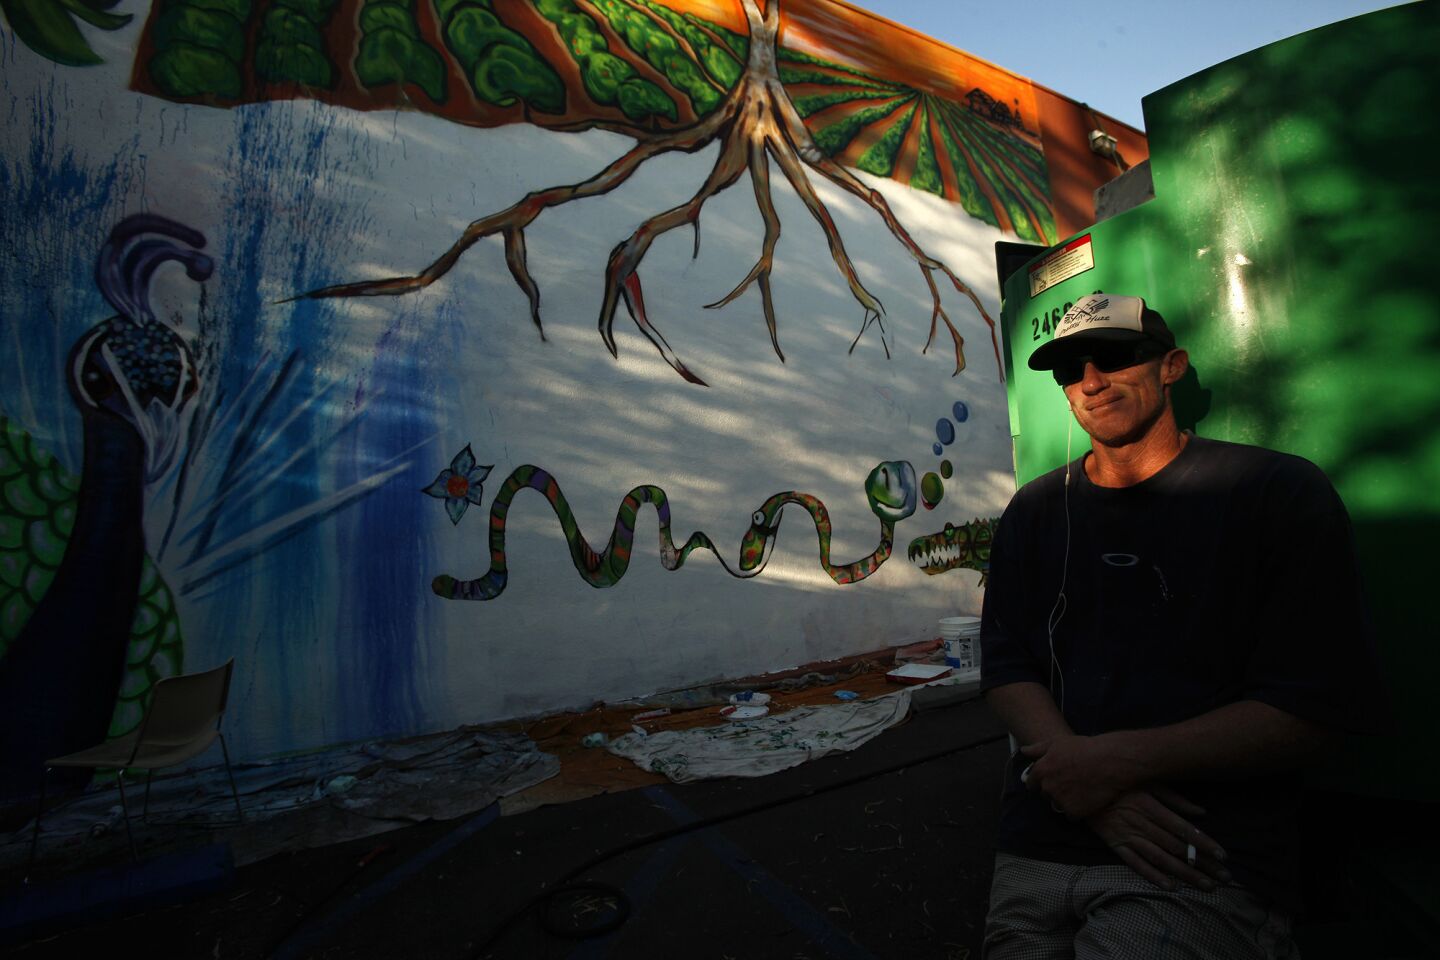 Former USC and Los Angeles Raiders quarterback Todd Marinovich takes a break from painting his commissioned mural on the side of the GEM Theater in Garden Grove in 2014.